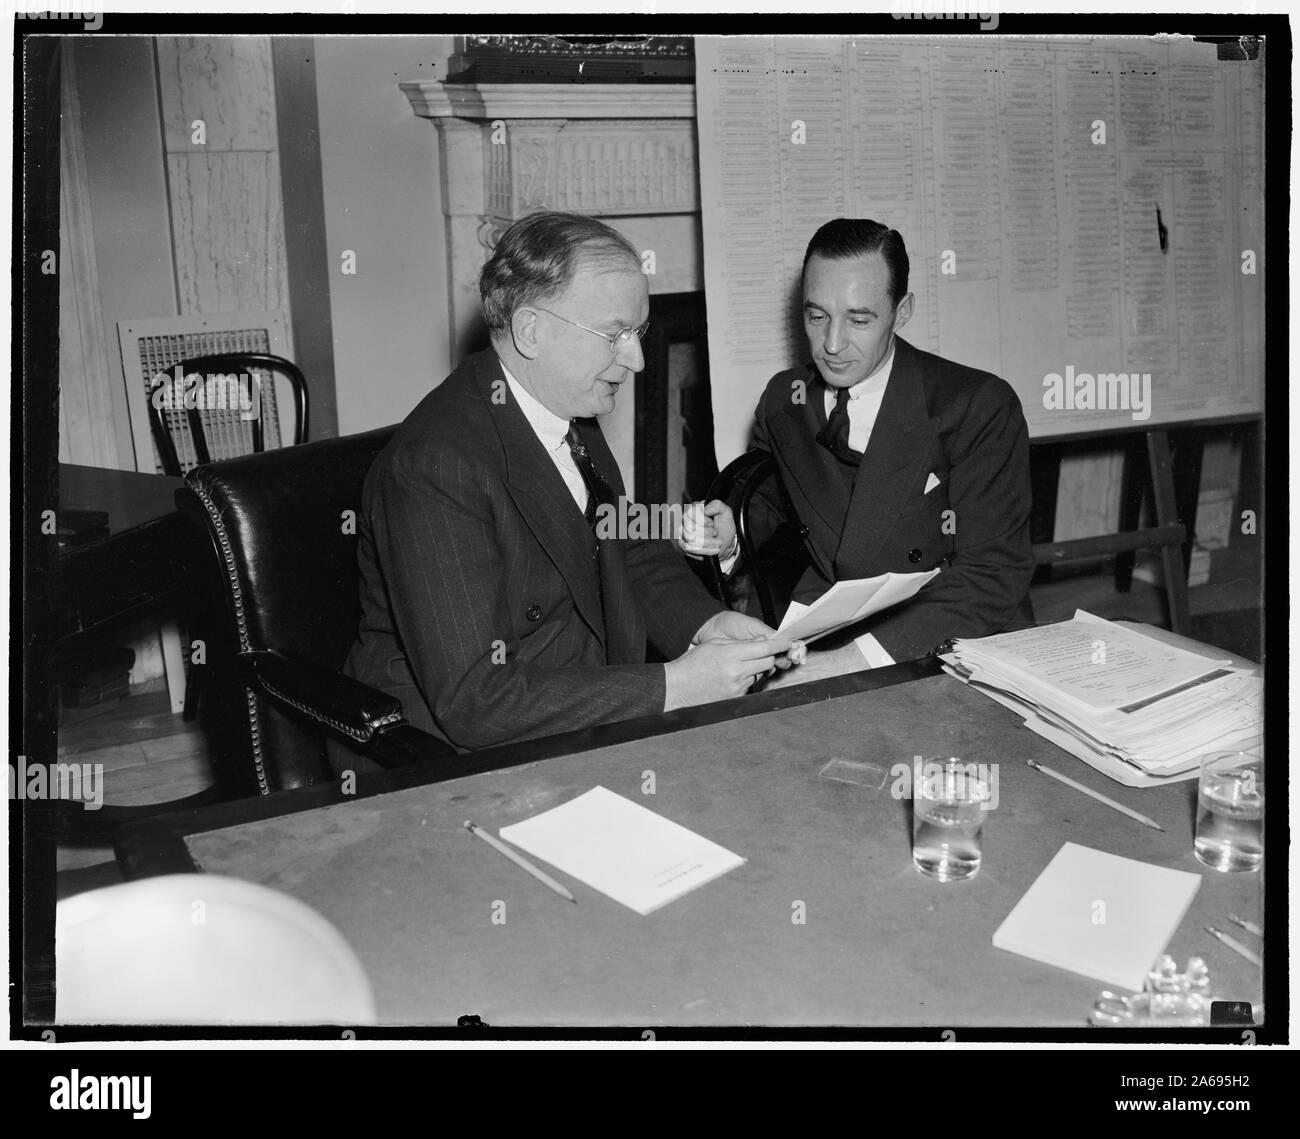 Young Ford blames ICC. Washington, D.C., Jan. 7. ICC order that all railroads use heavy equipment caused the Fords to sell the Detroit, Toledo, and Ironton Road in 1929, Edsel Ford, (right) President of the Ford Motor Co., told Chairman Burton K. Wheeler of the Senate rail inquiry today Stock Photo